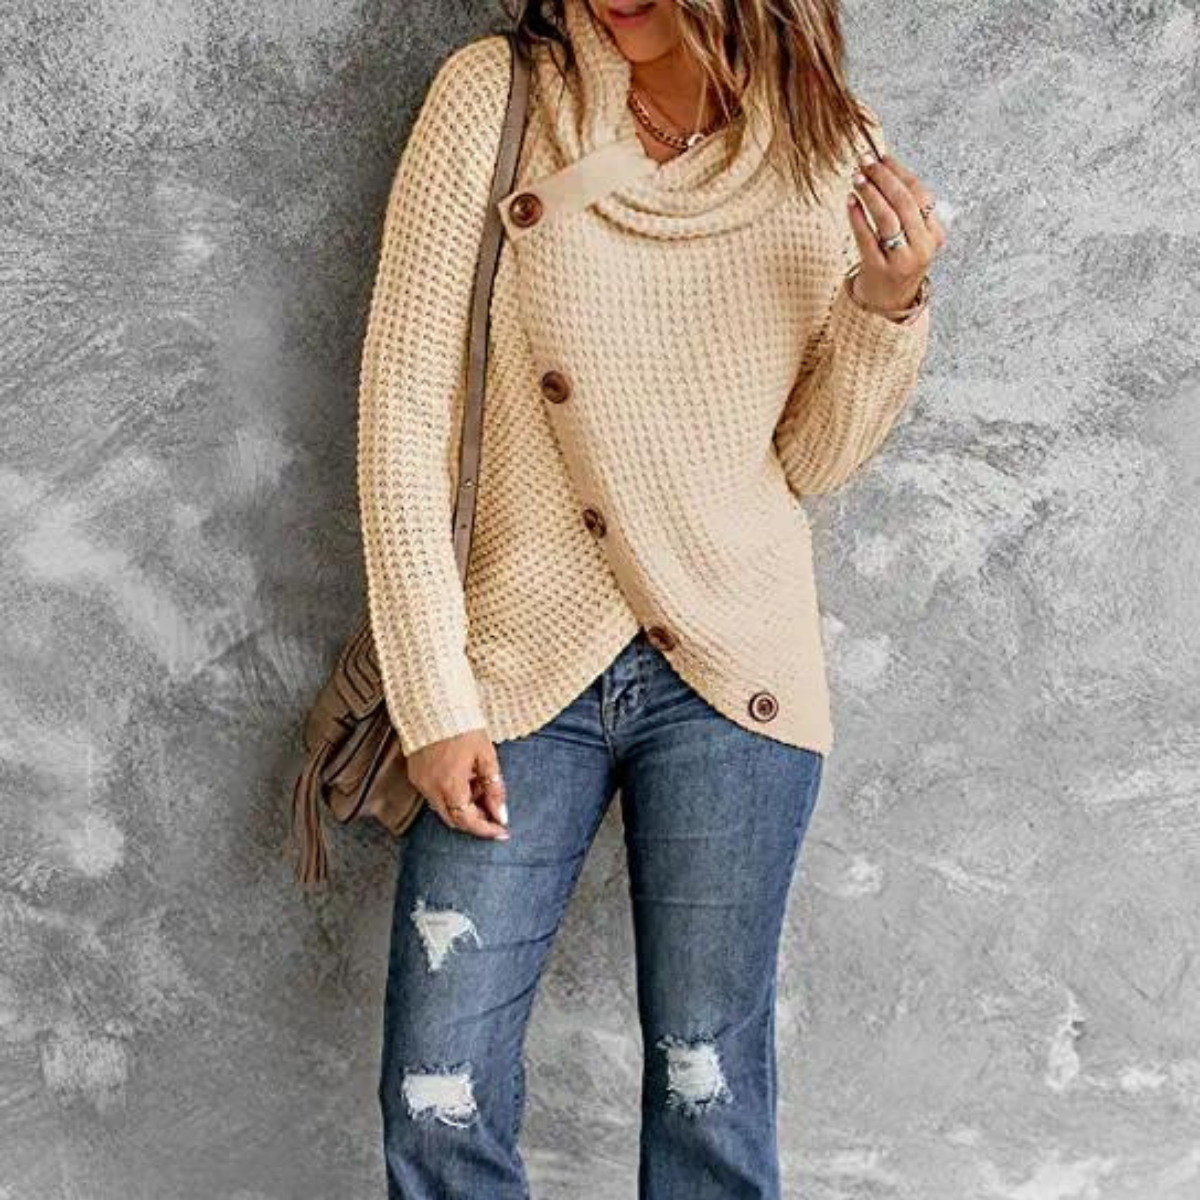 35 Fall Fashion Items You'll Want To Get ASAP